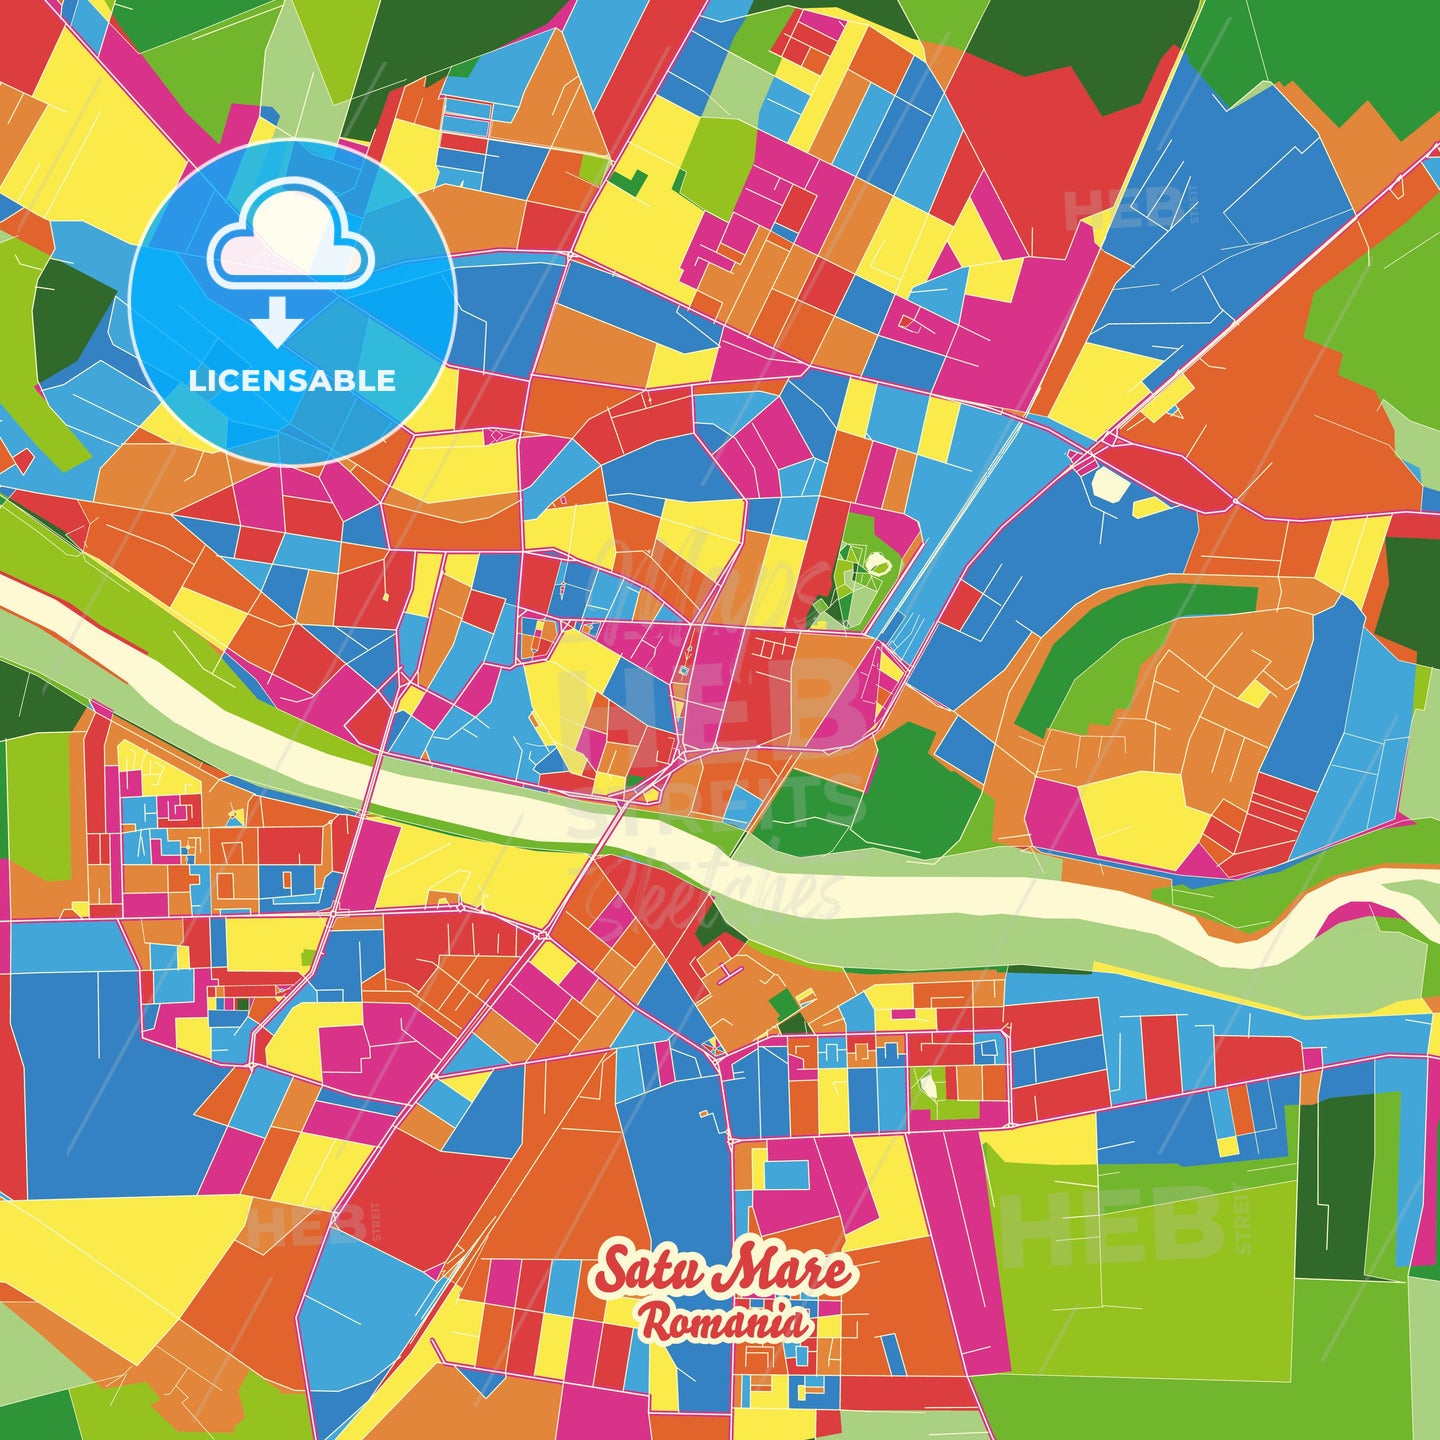 Satu Mare, Romania Crazy Colorful Street Map Poster Template - HEBSTREITS Sketches